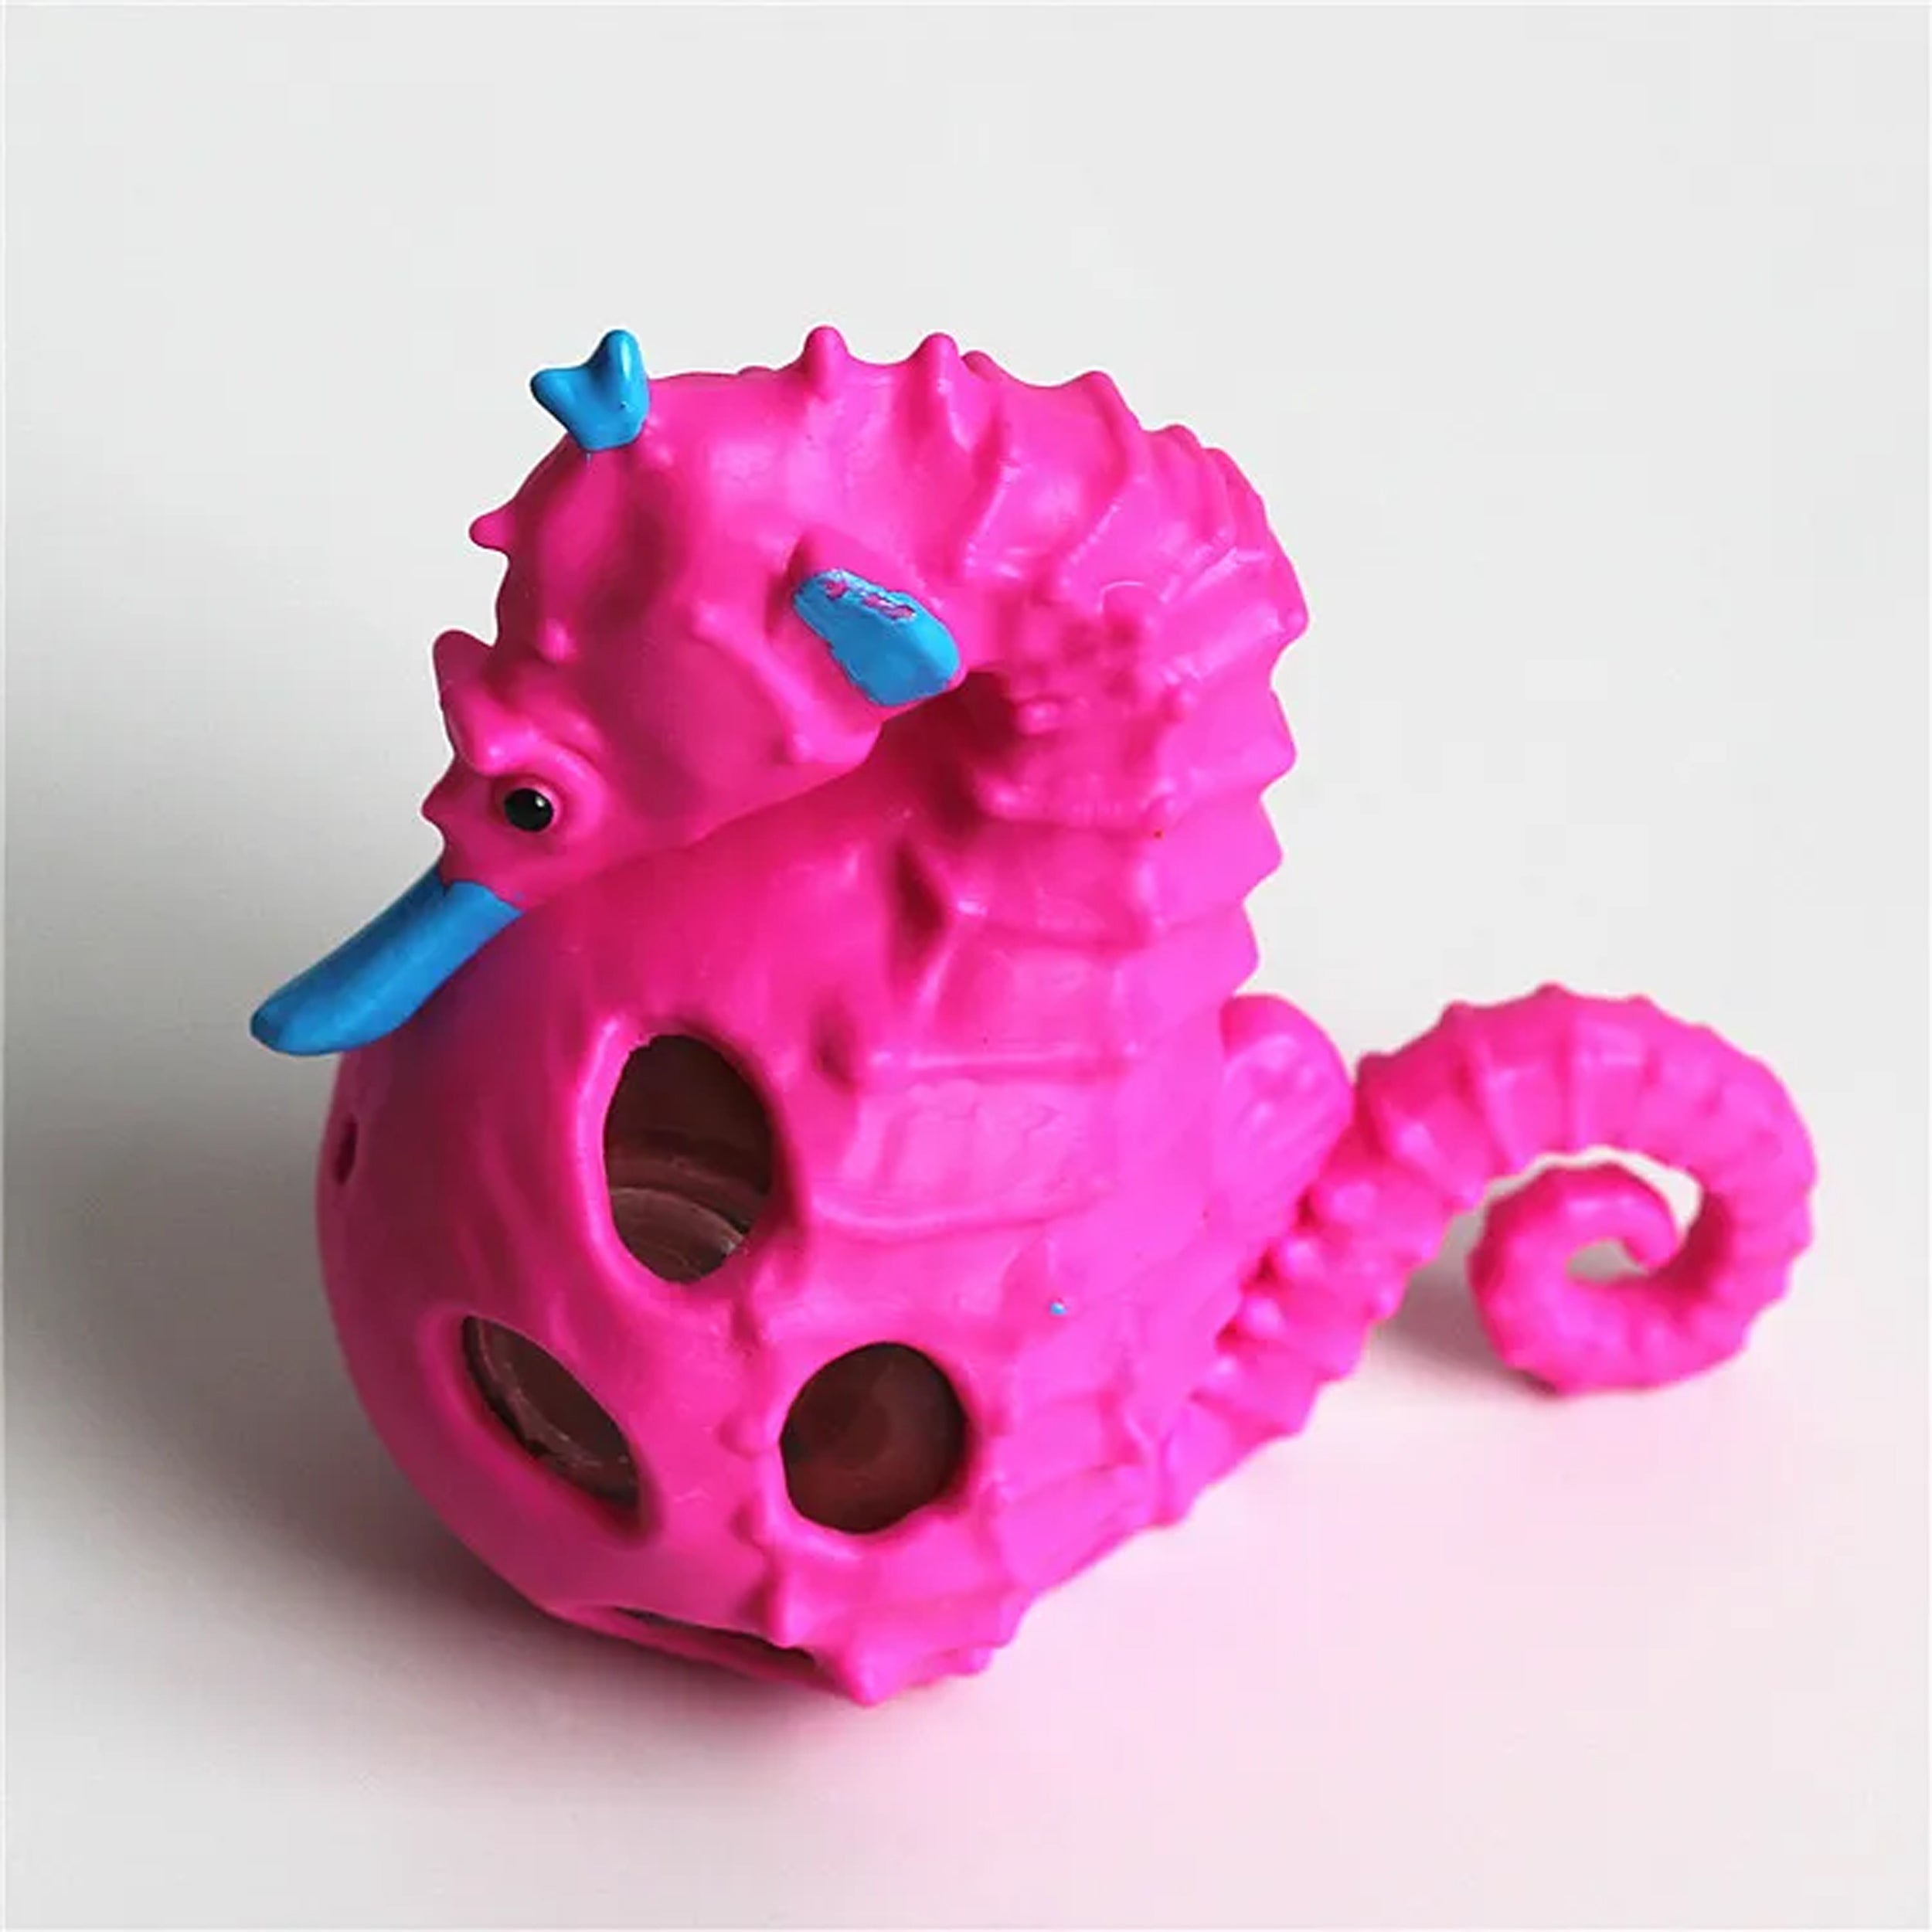 Cute Animal Sea Horse Squishy Spongy Water Beads Ball Toy for Kids